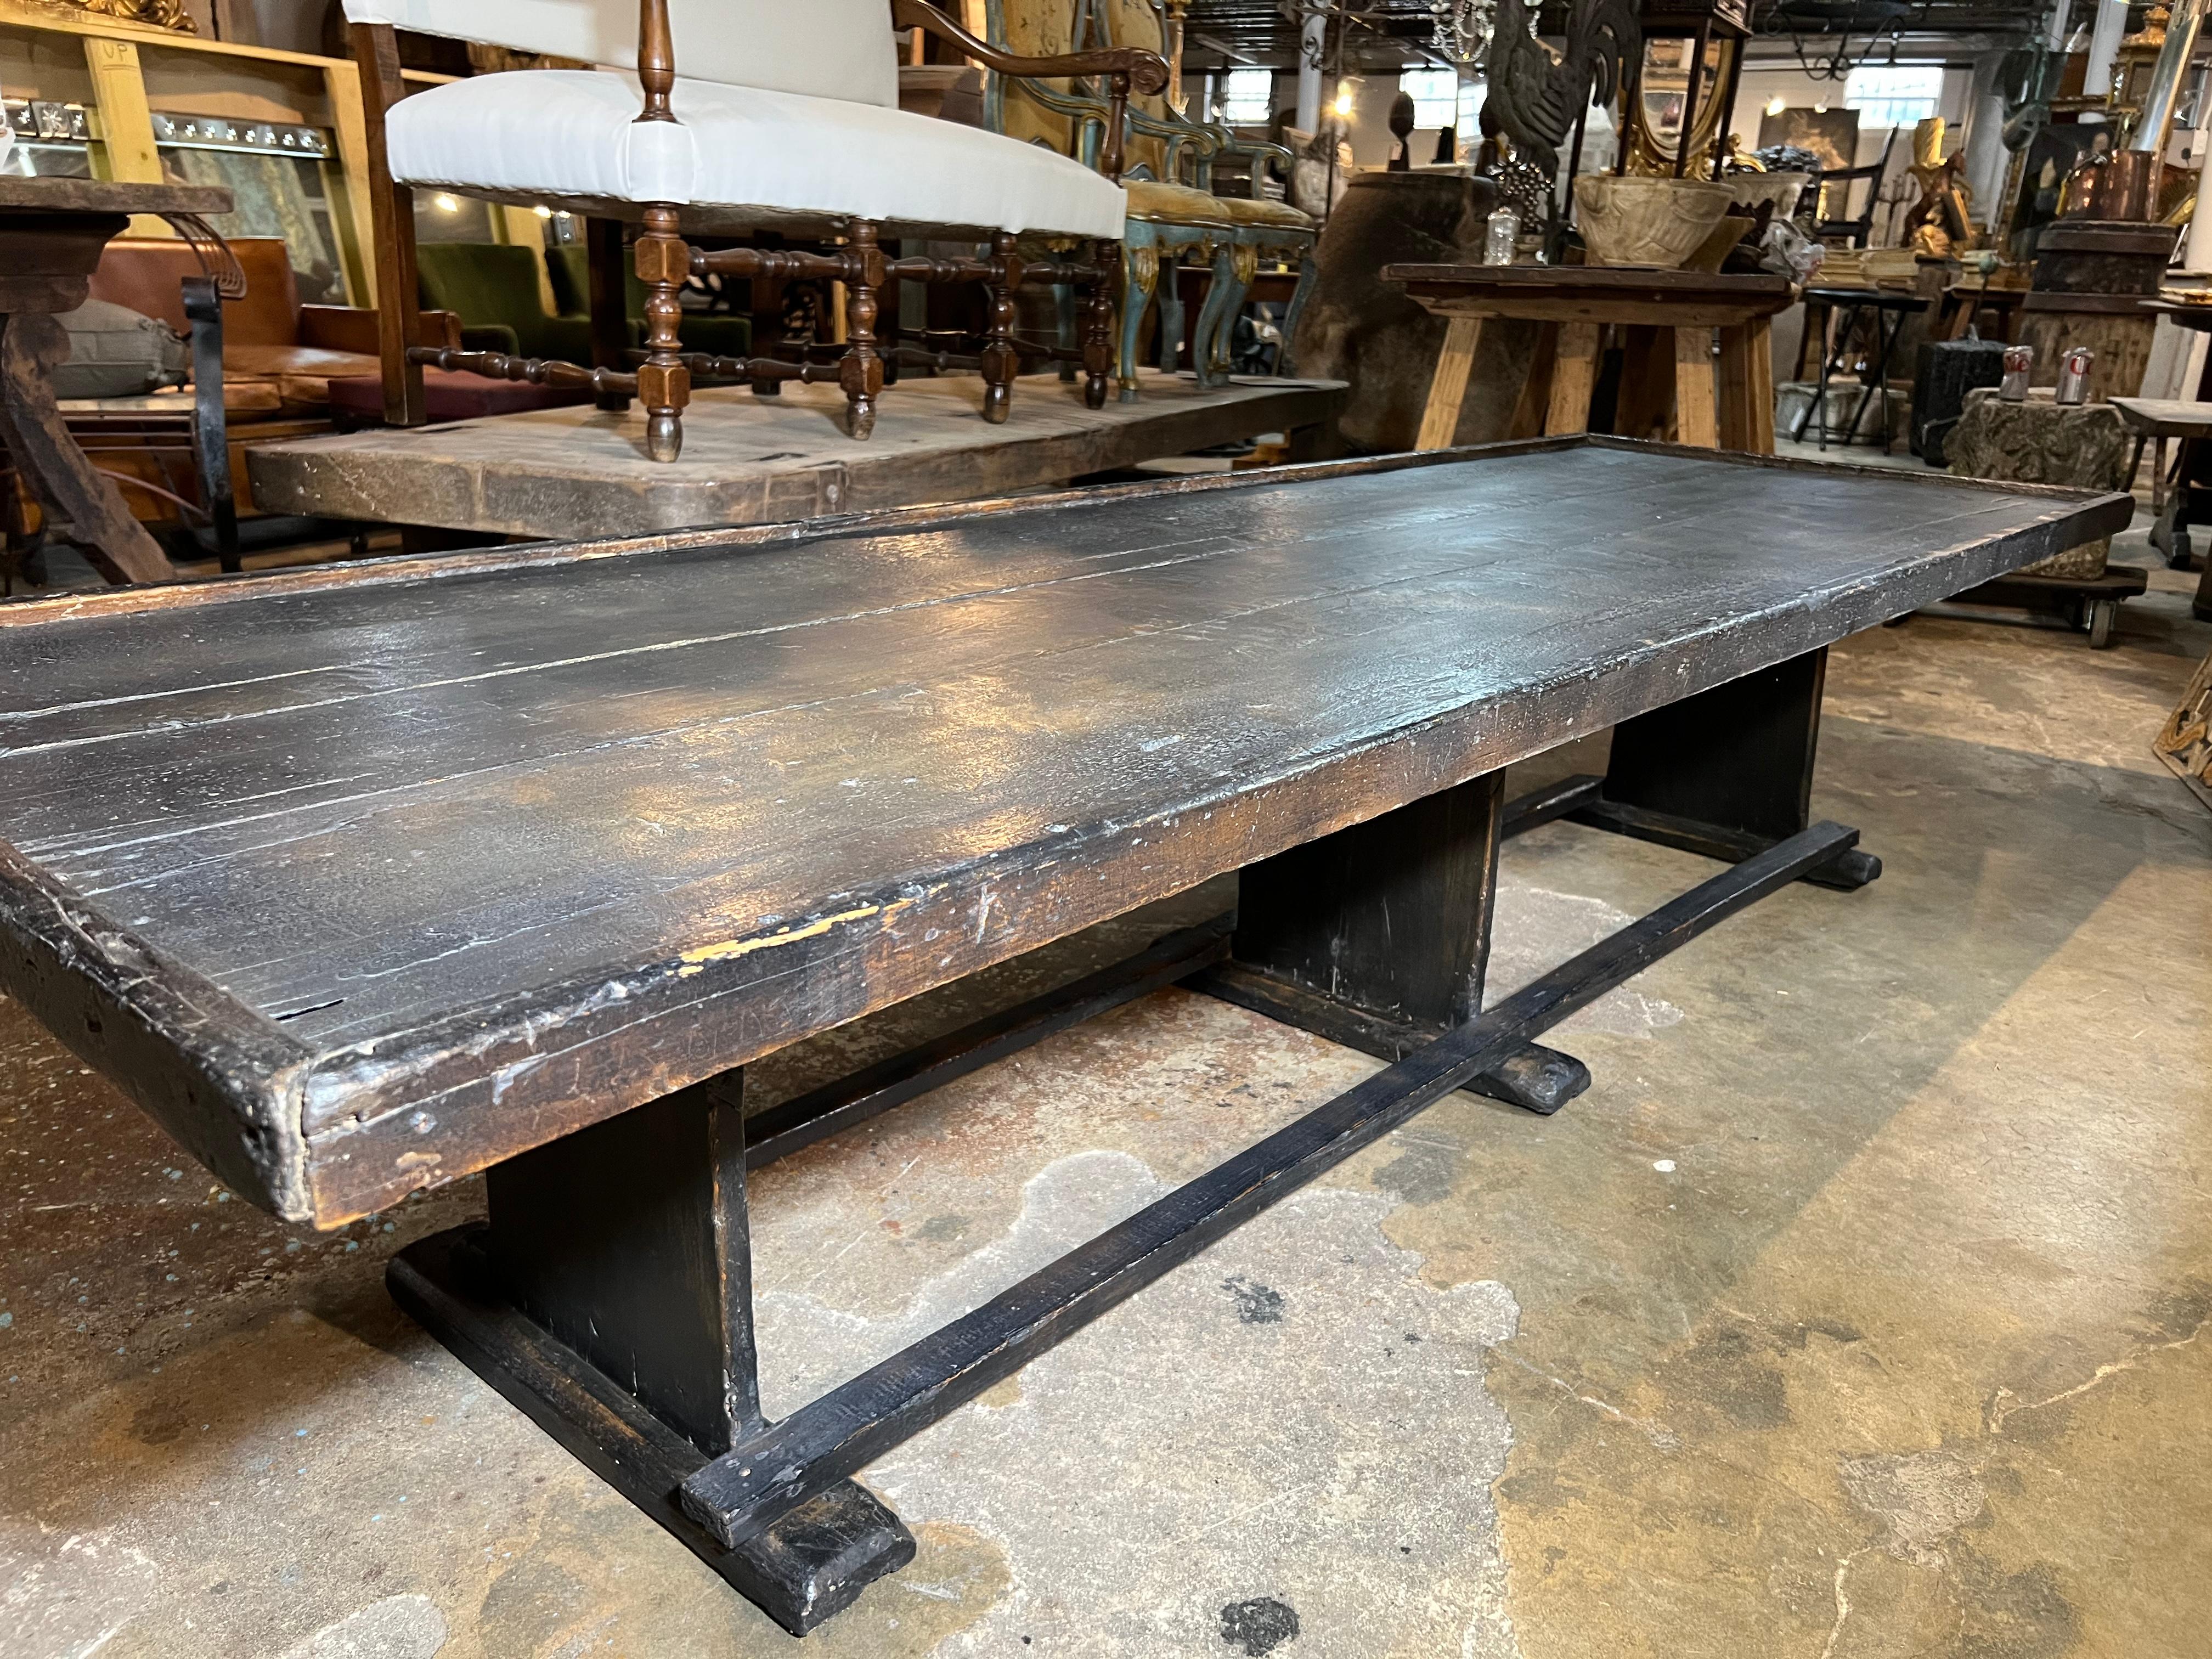 A very charming table base, coffee table from the South of France. Soundly constructed from richly painted poplar wood. Great patina - warm and luminous. Perfect for an oversized sofa.